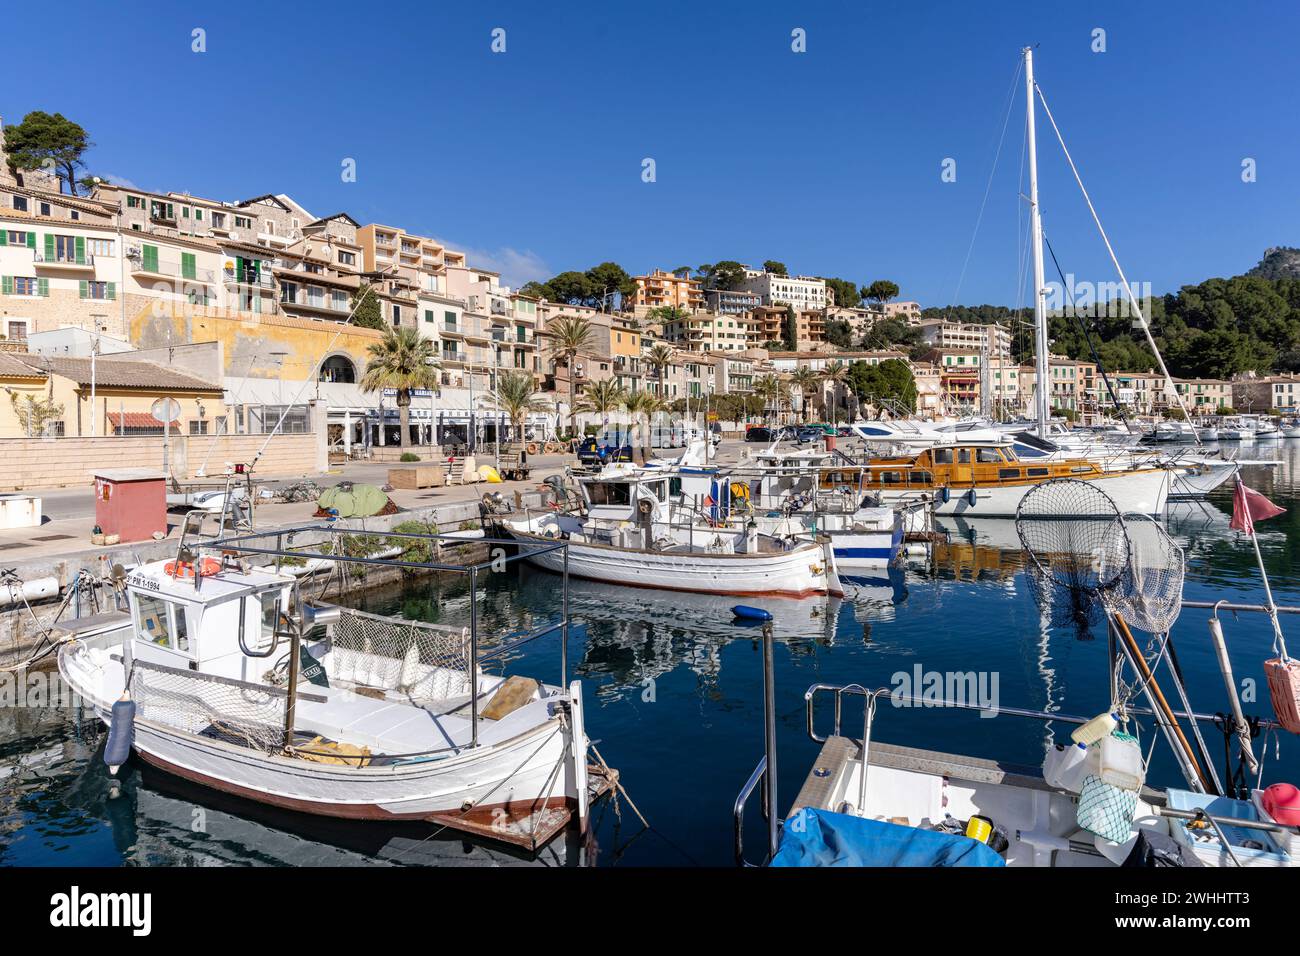 Traditional boats in front of the Santa Catalina neighborhood Stock Photo